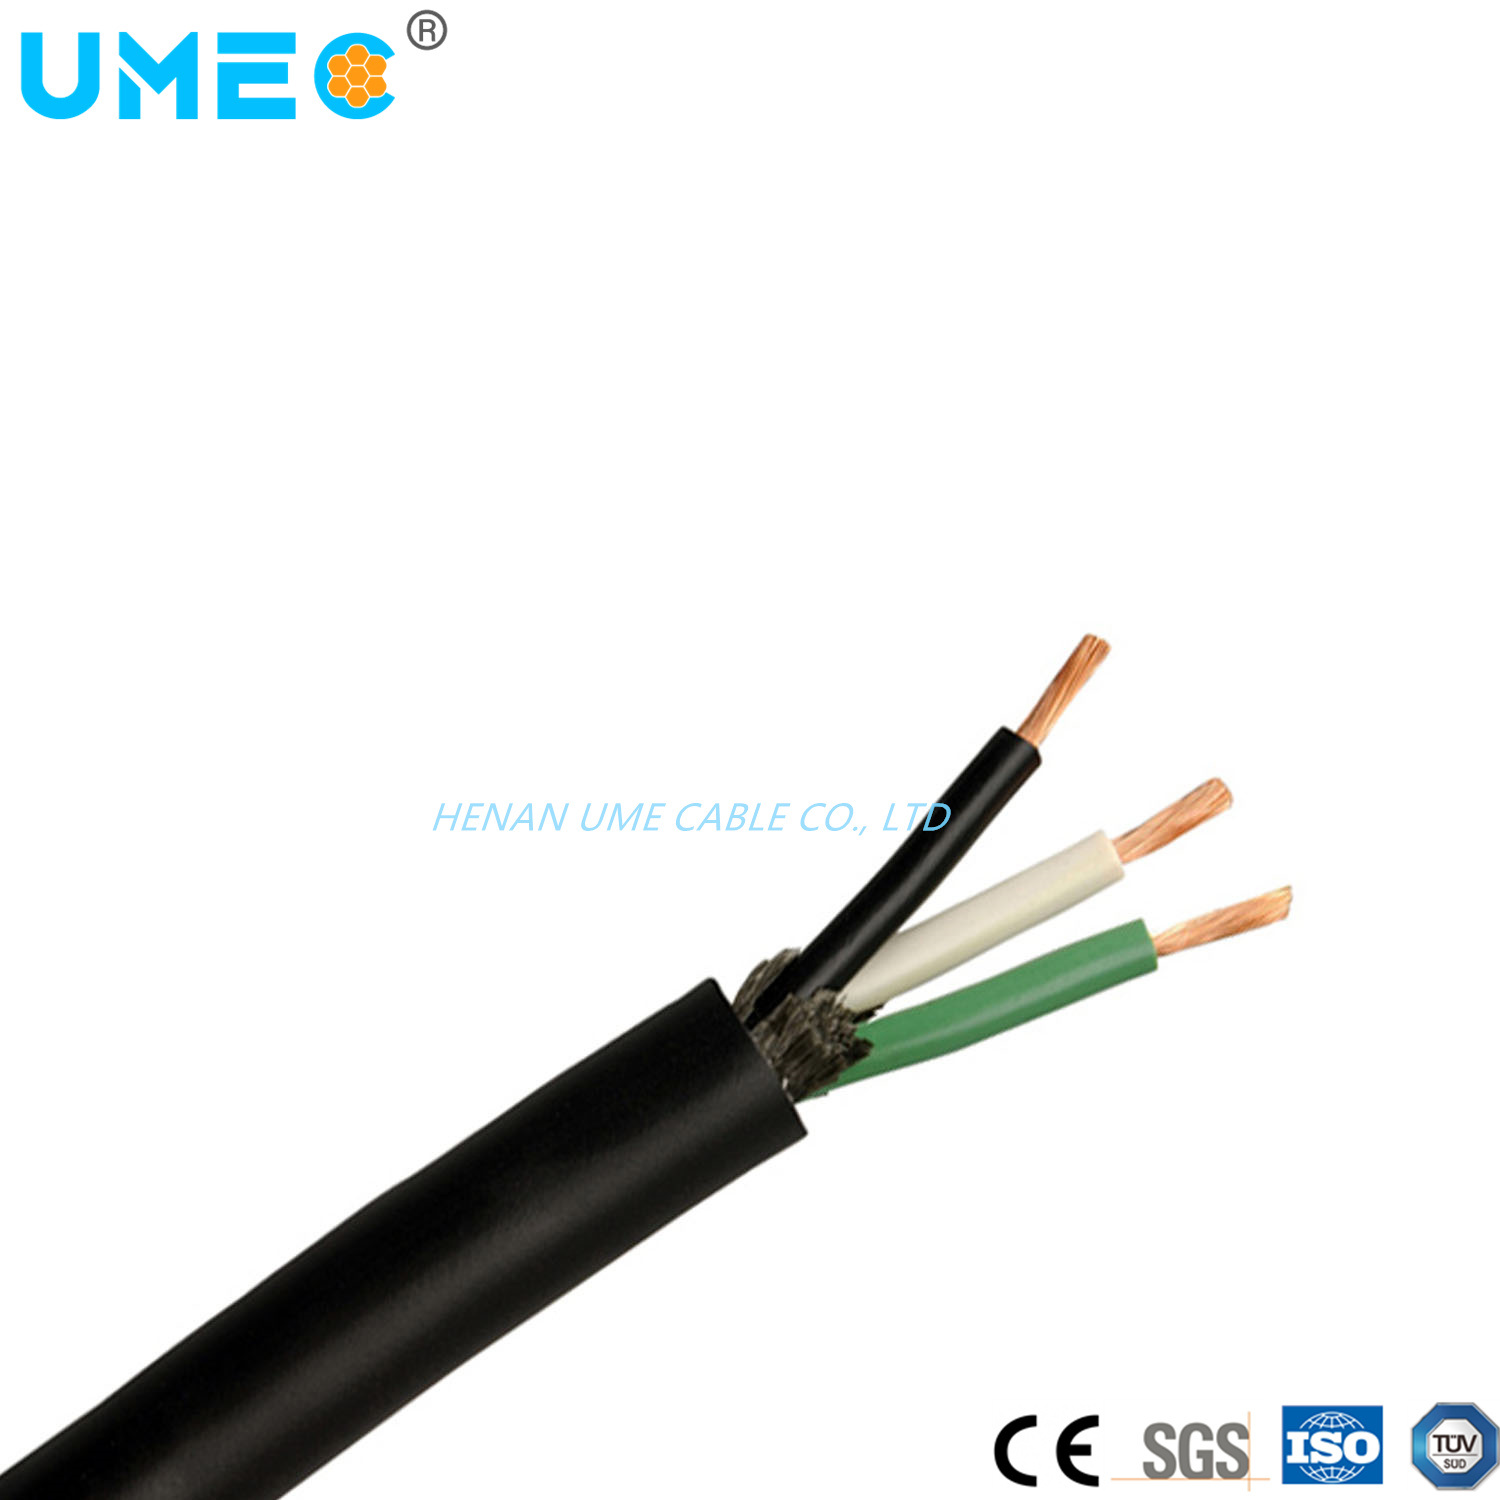 The High Quality Low Voltage Soow Cable